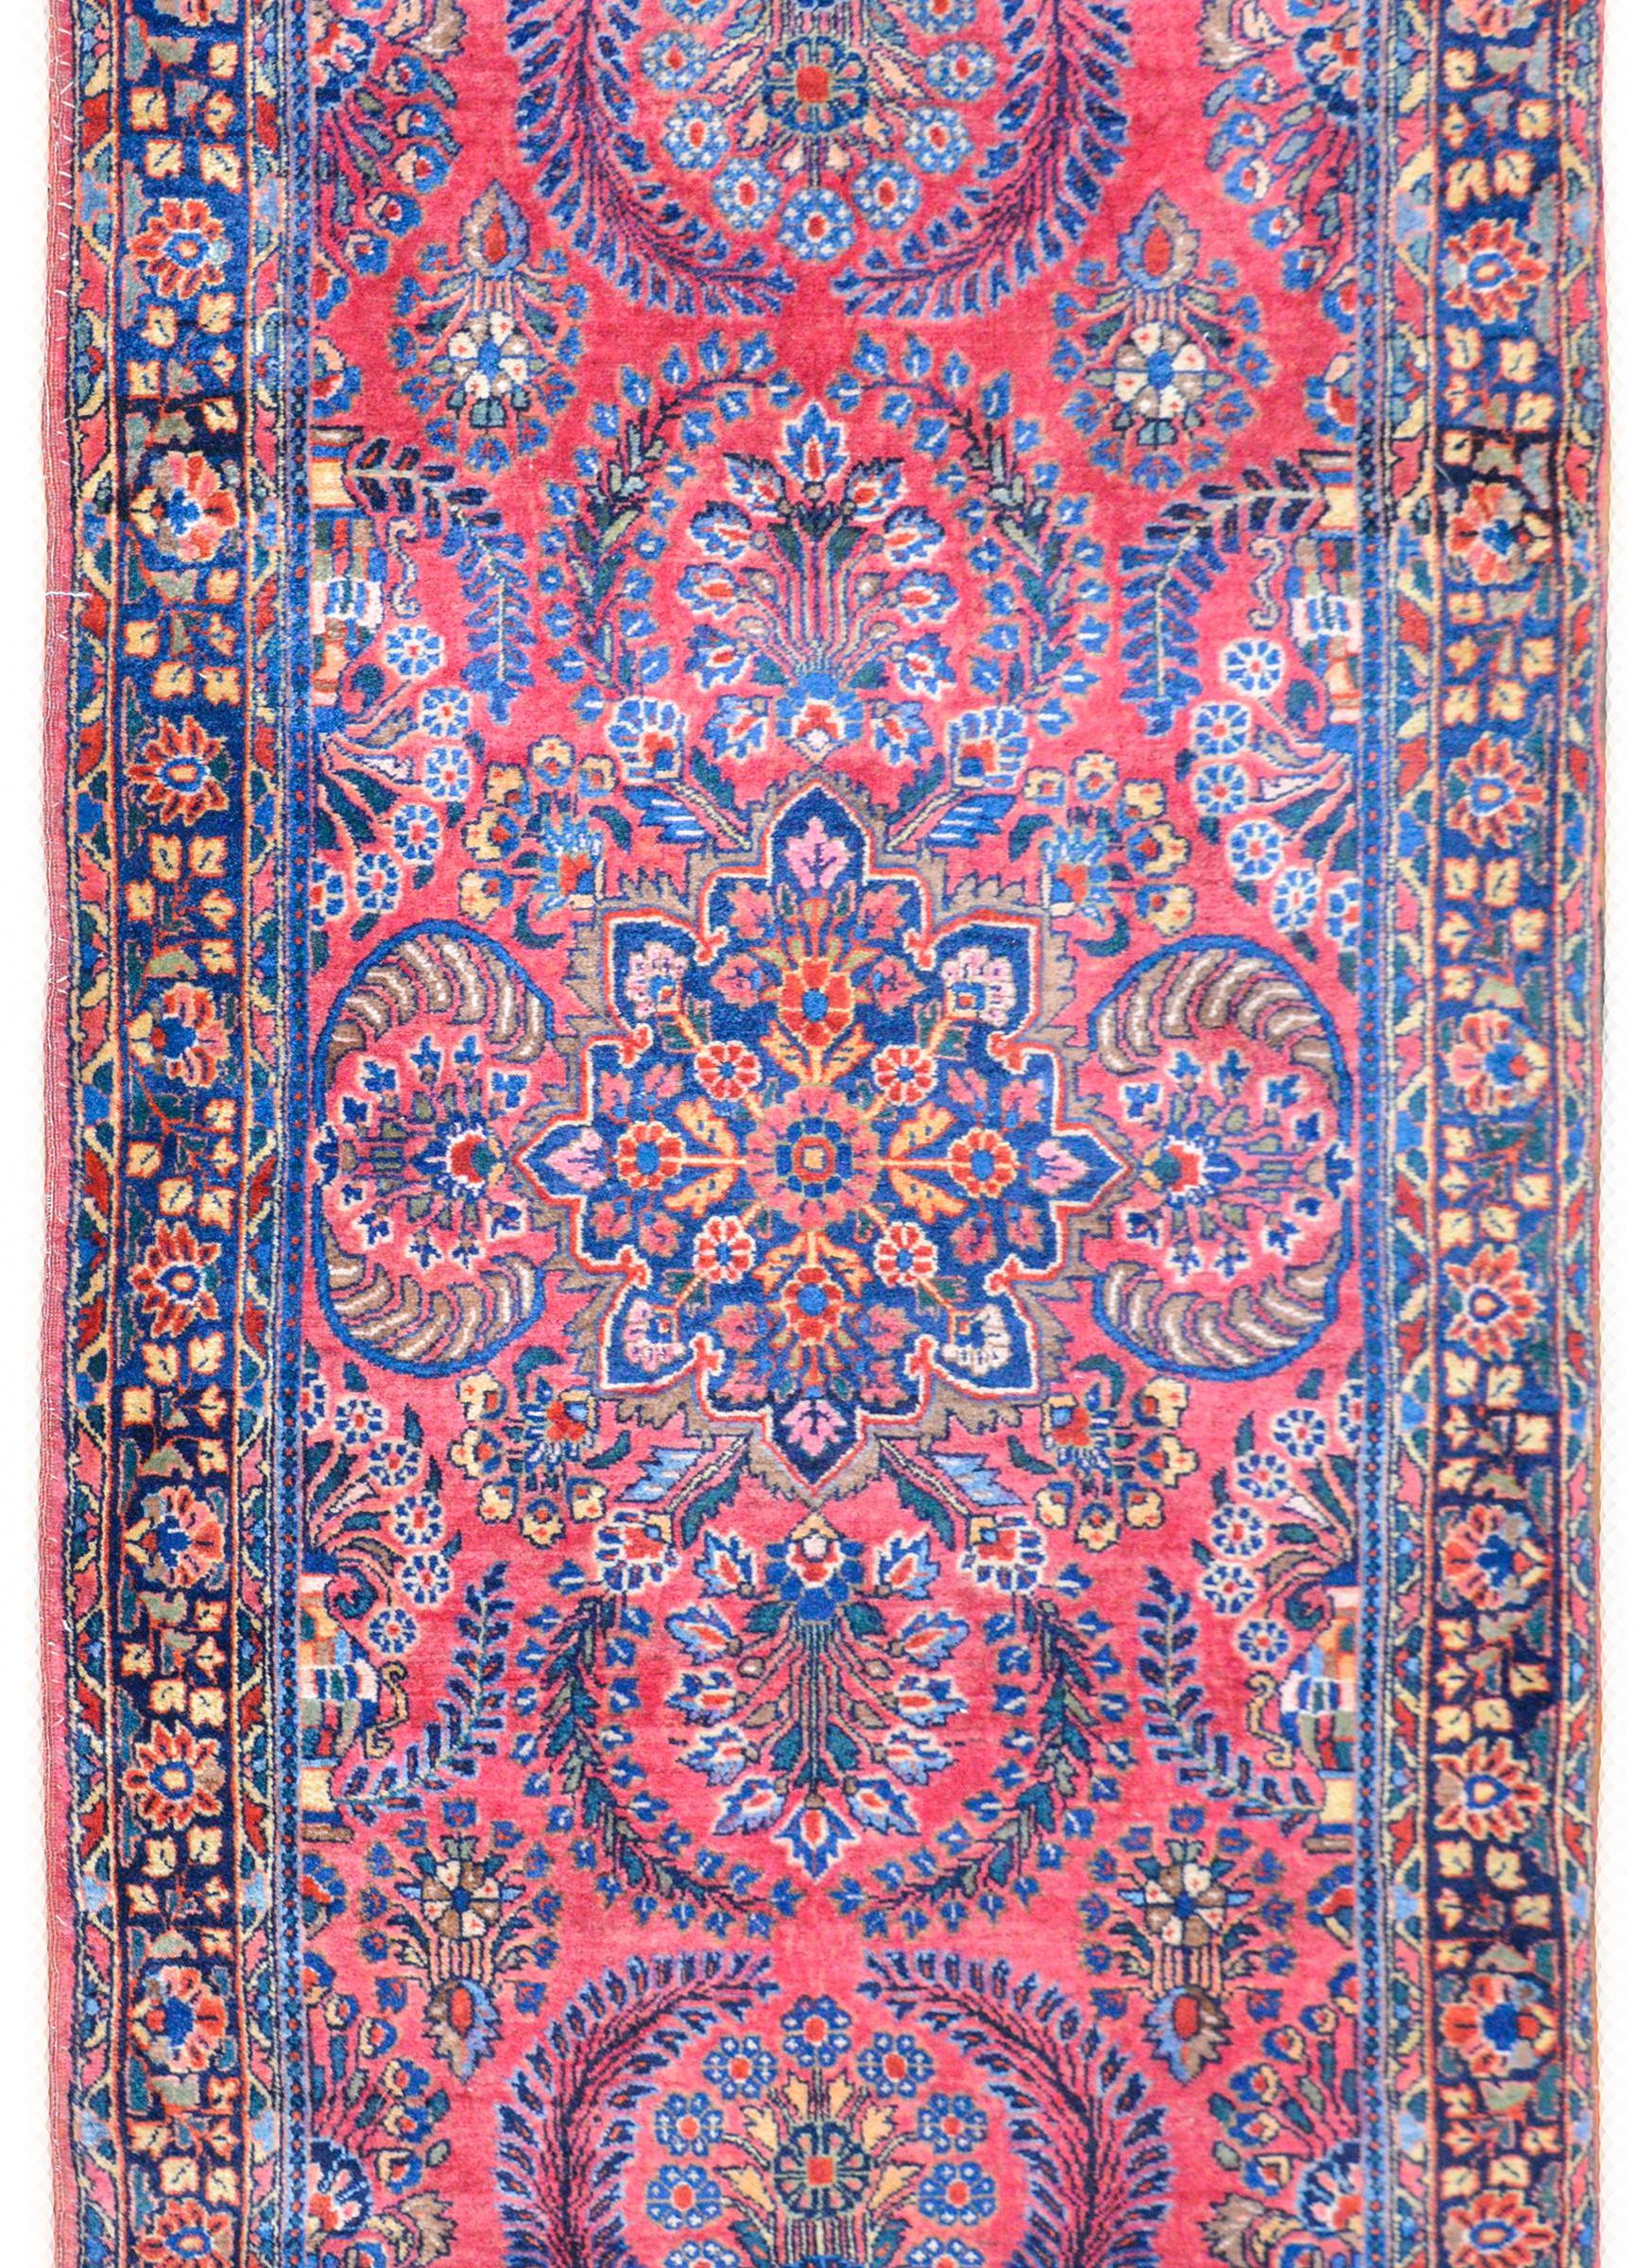 A wonderful early 20th century Persian Sarouk rug with an incredible large floral medallion in a large-scale mirrored scrolling vine and leaf pattern woven in light and dark indigo, cream, gold, and pink, against a rich cranberry field. The border